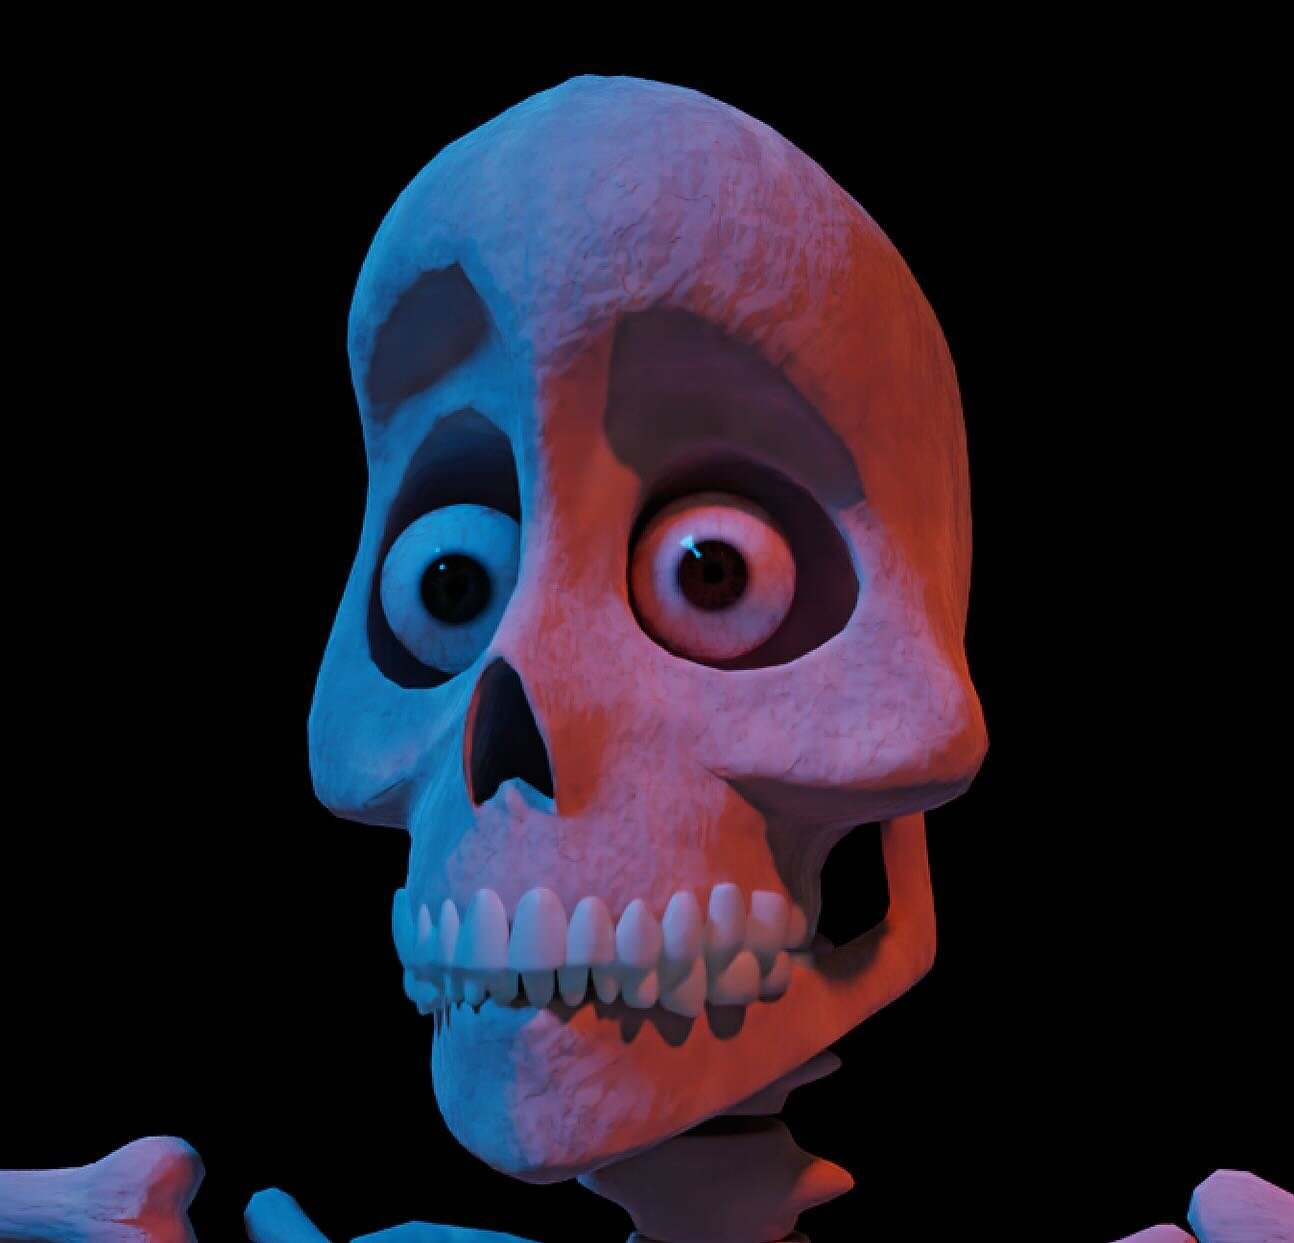 more scary bones character dev